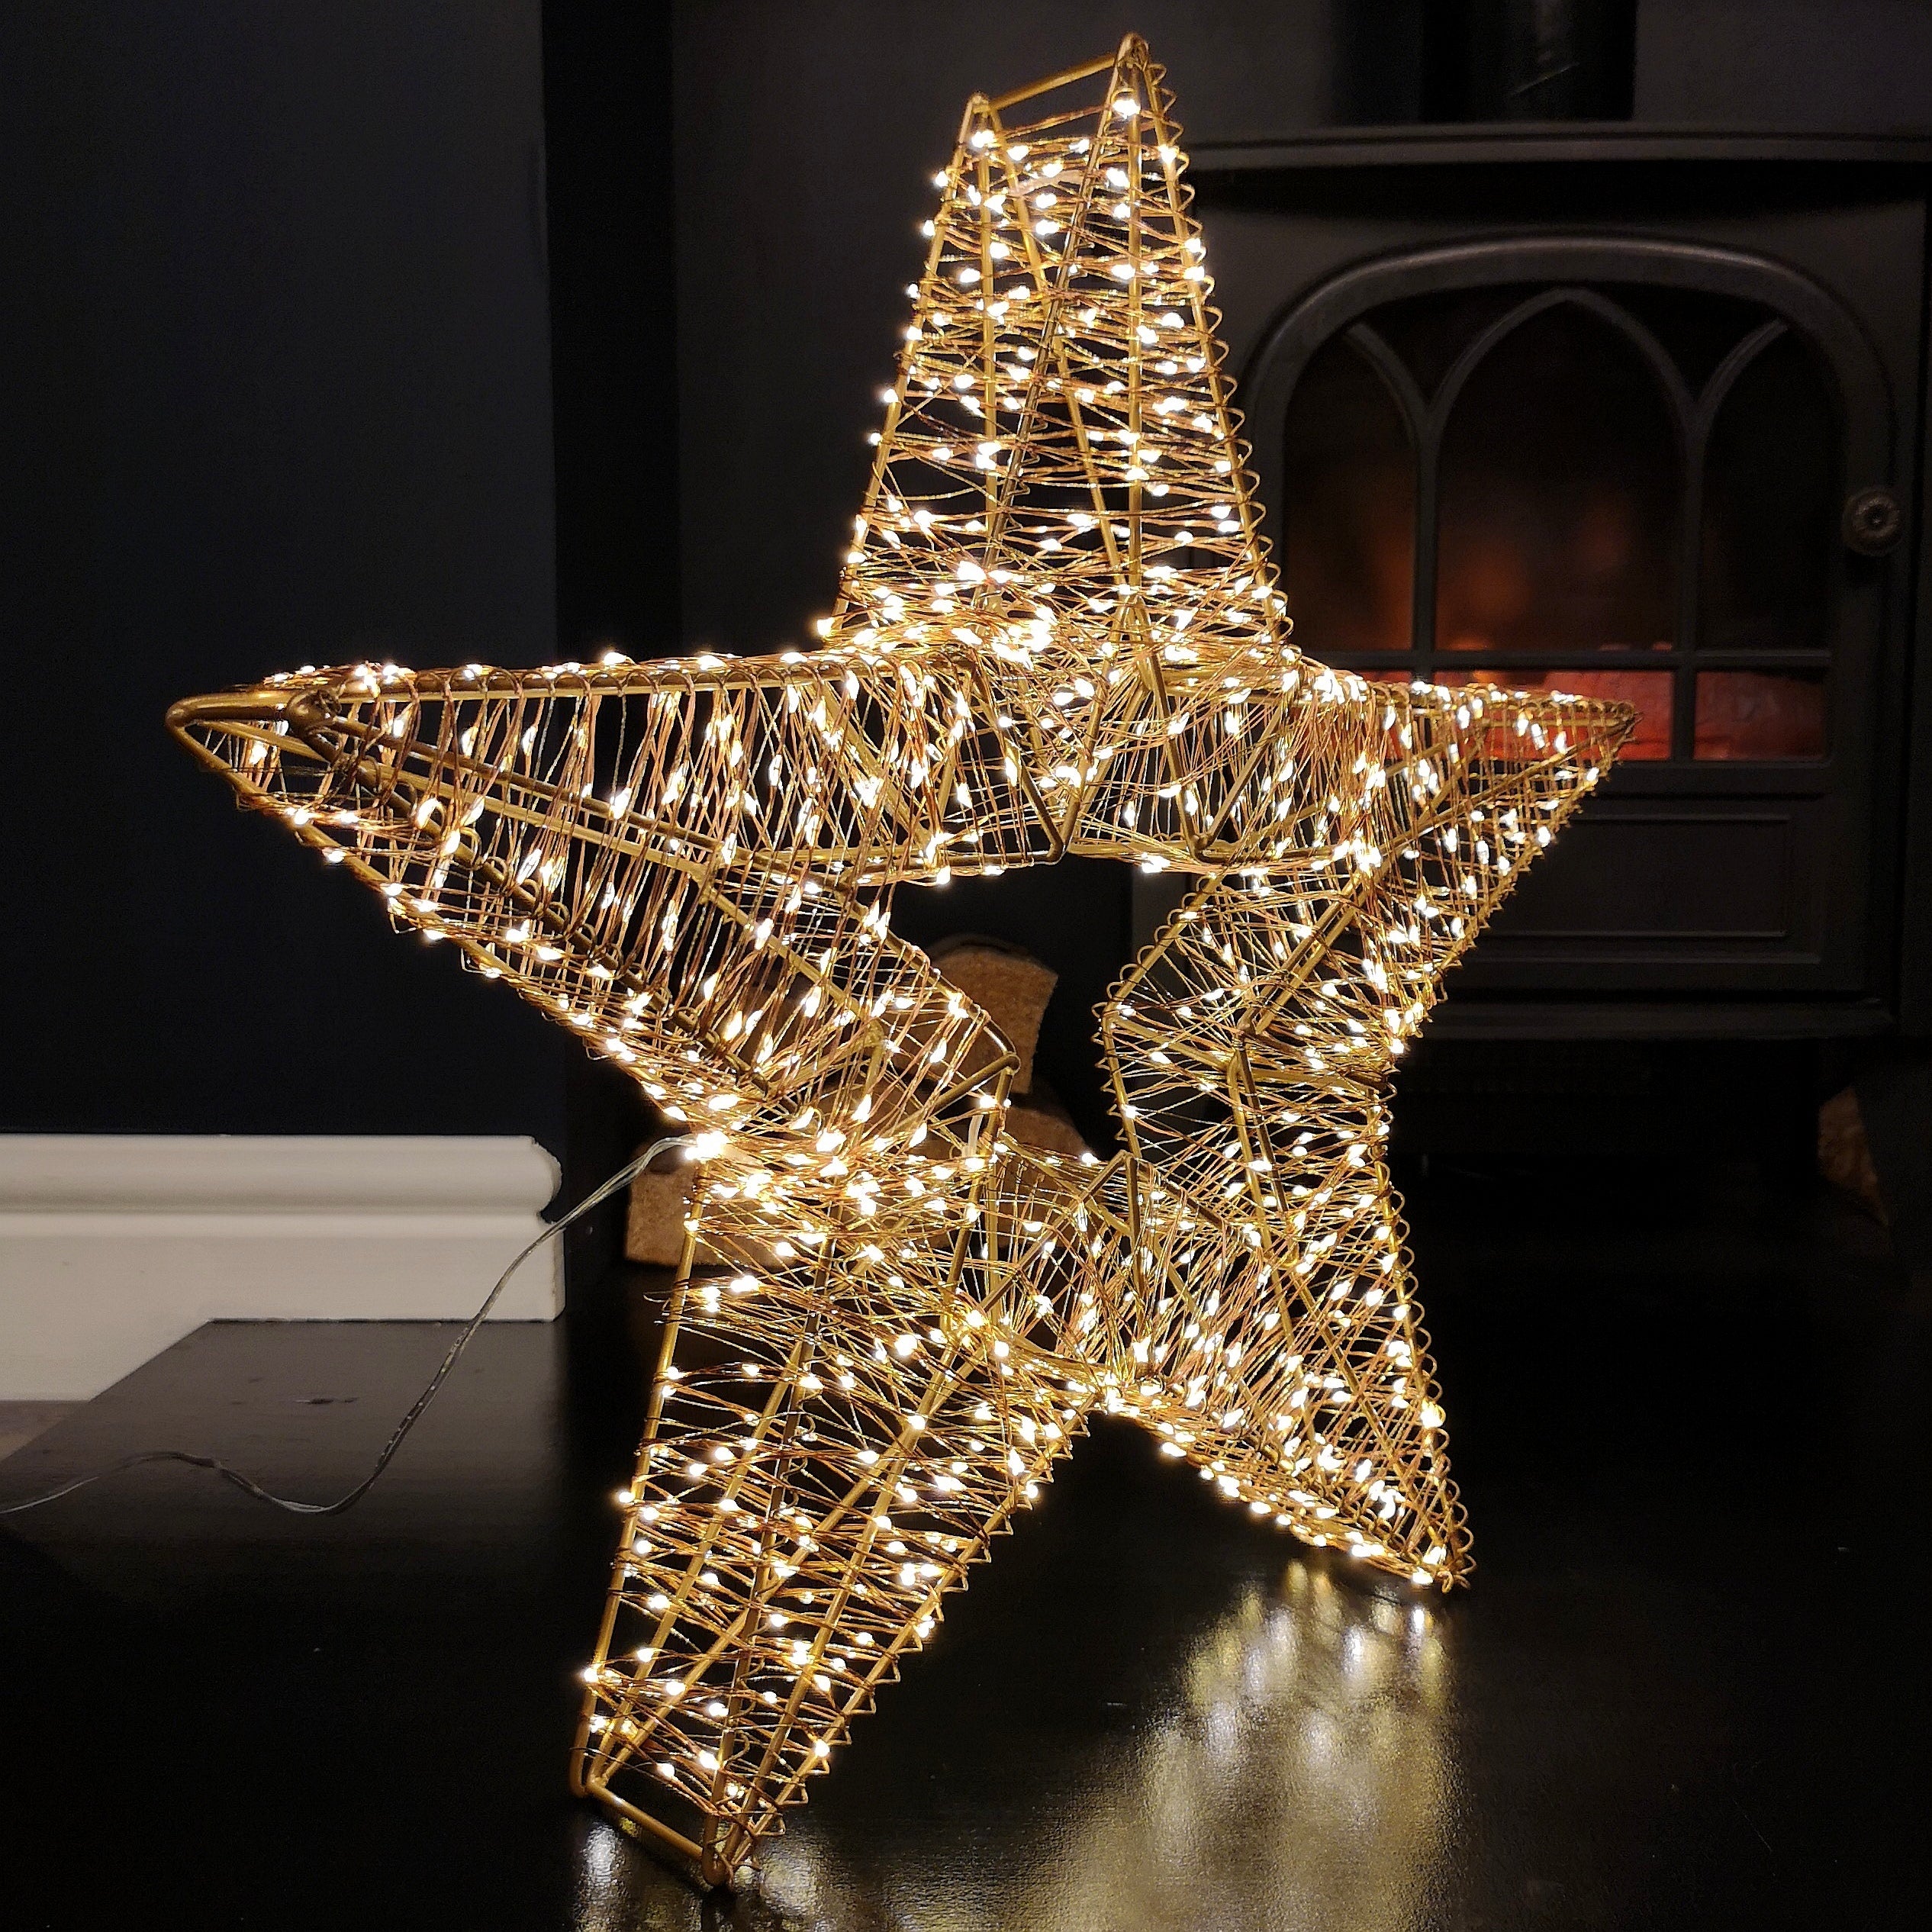 45cm Light Up Rose Gold Star Christmas Sculpture Decoration with 750 Warm White LEDs